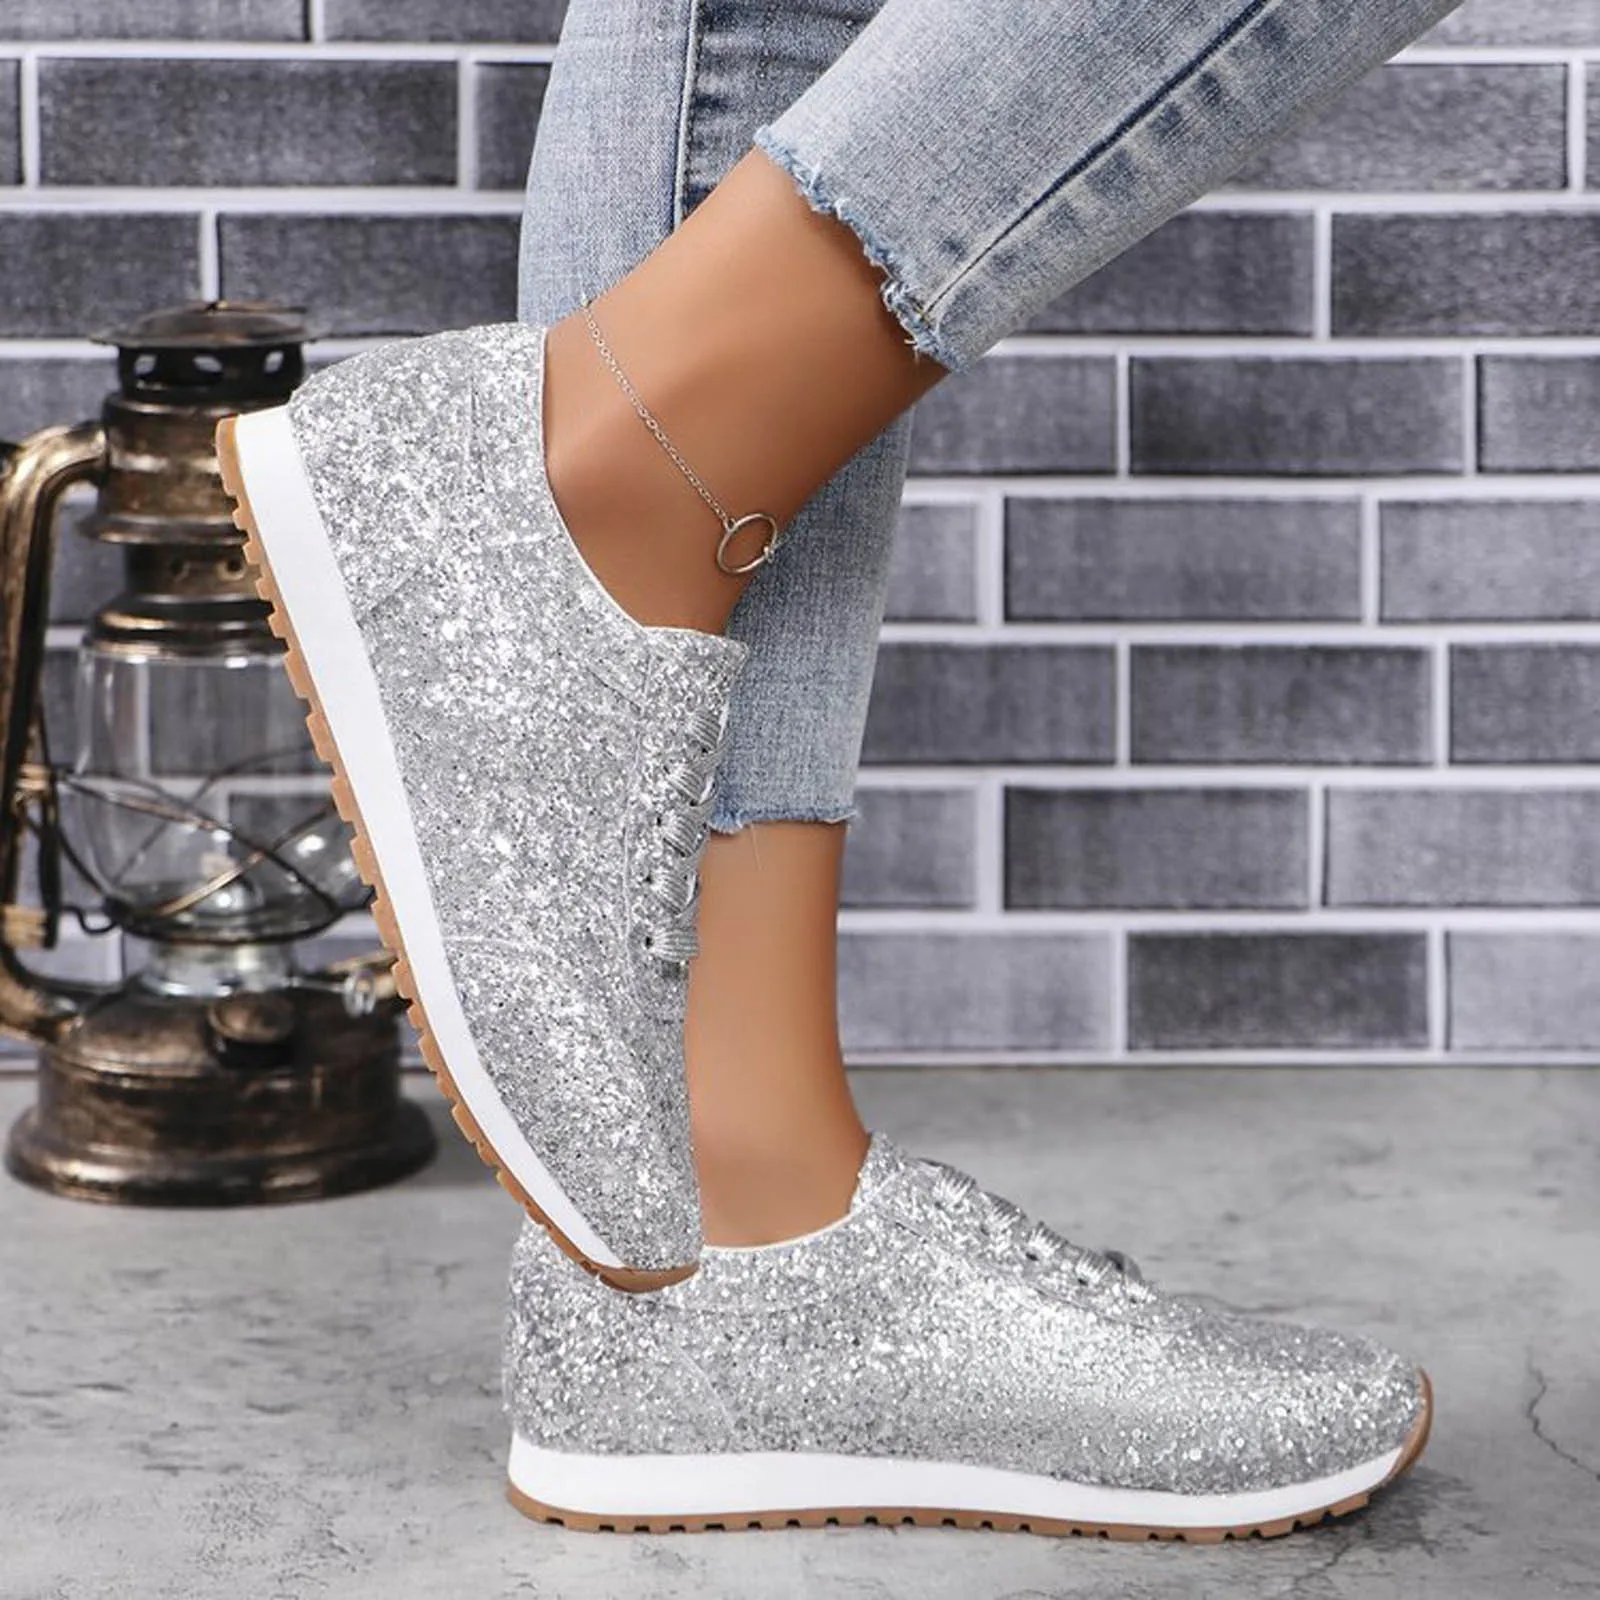 Women's Fashion Sequins Sneakers Casual Lace Up Sport Shoes Glitter ...